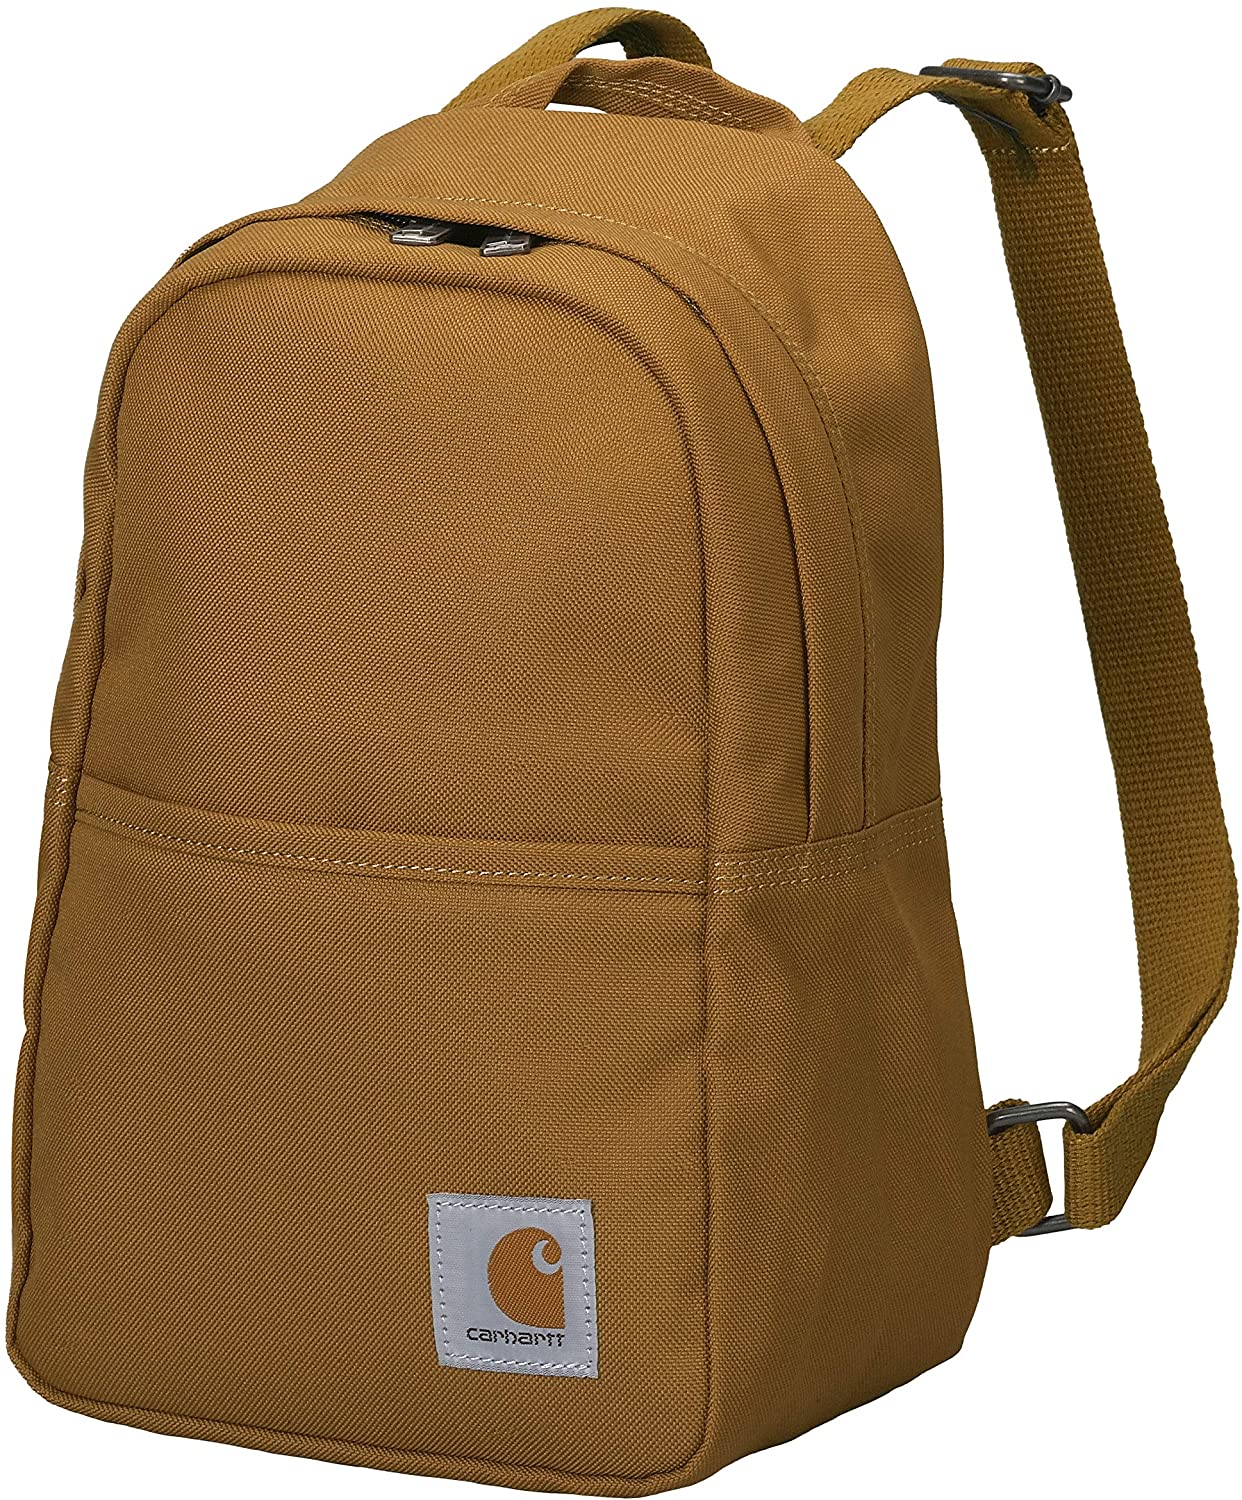 Everyday Essentials Daypack for Men and Women Basil One Size Carhartt Mini Backpack 